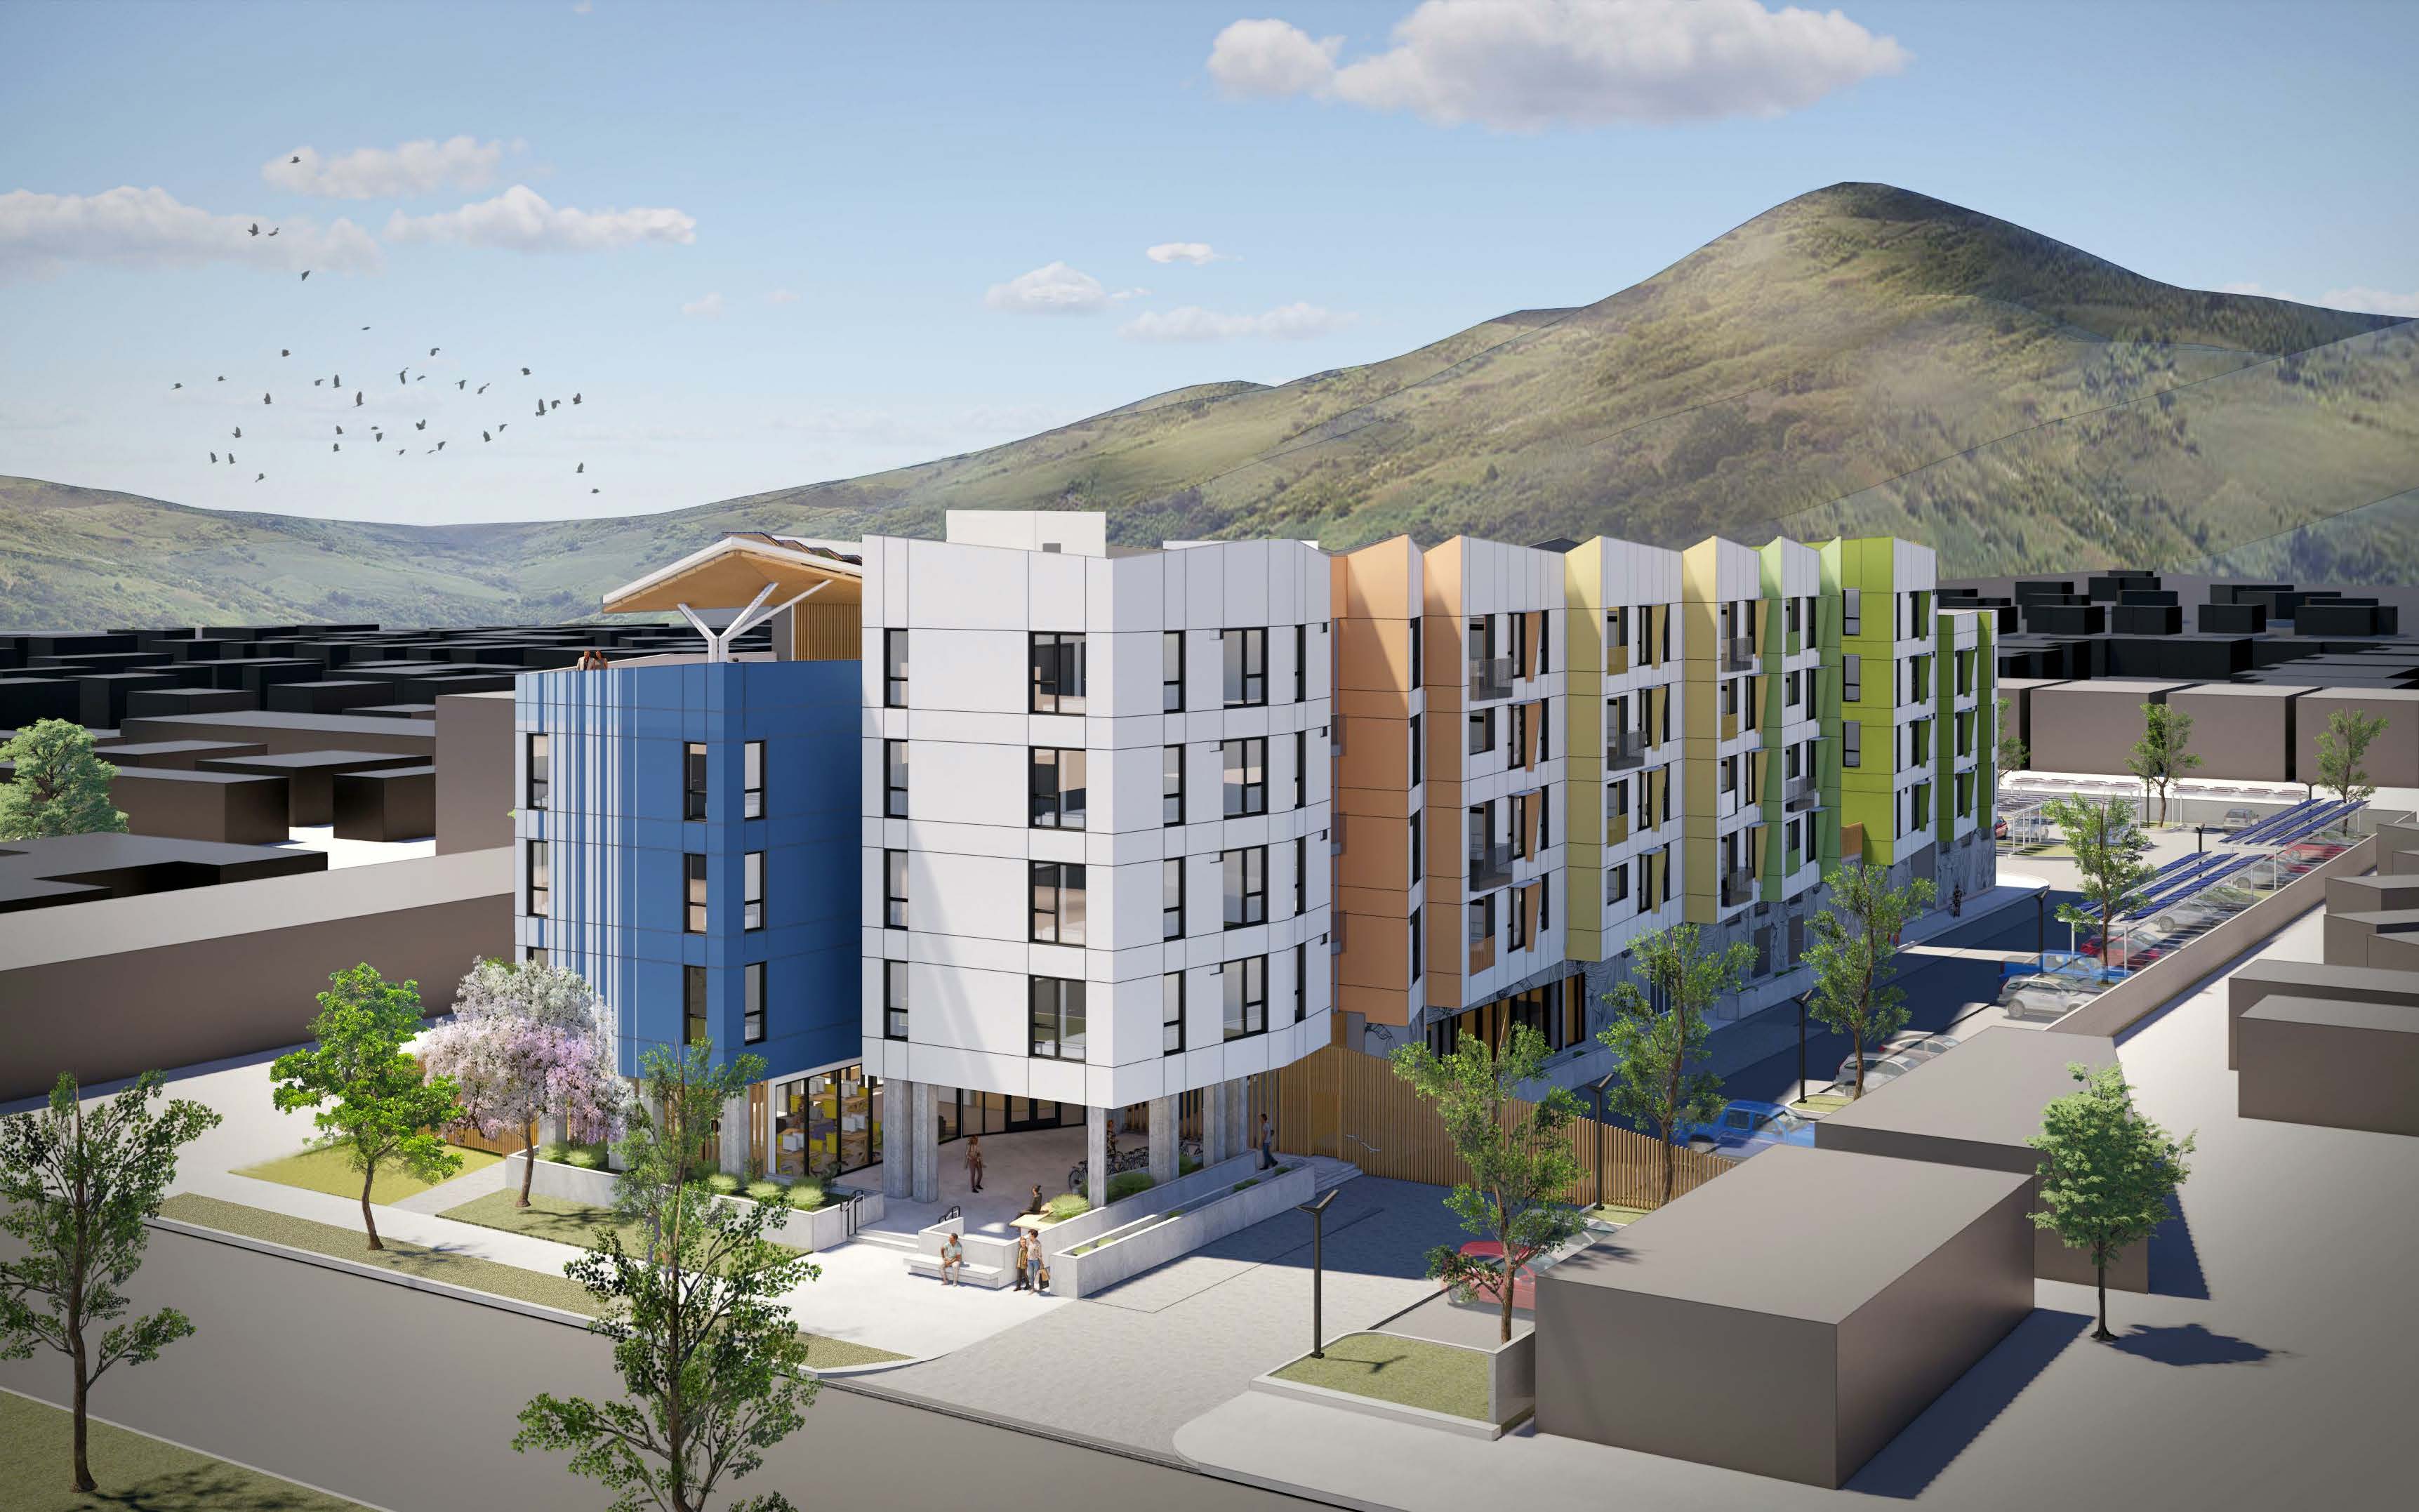 Rendering of The Magnolias, an affordable housing project in Morgan Hill